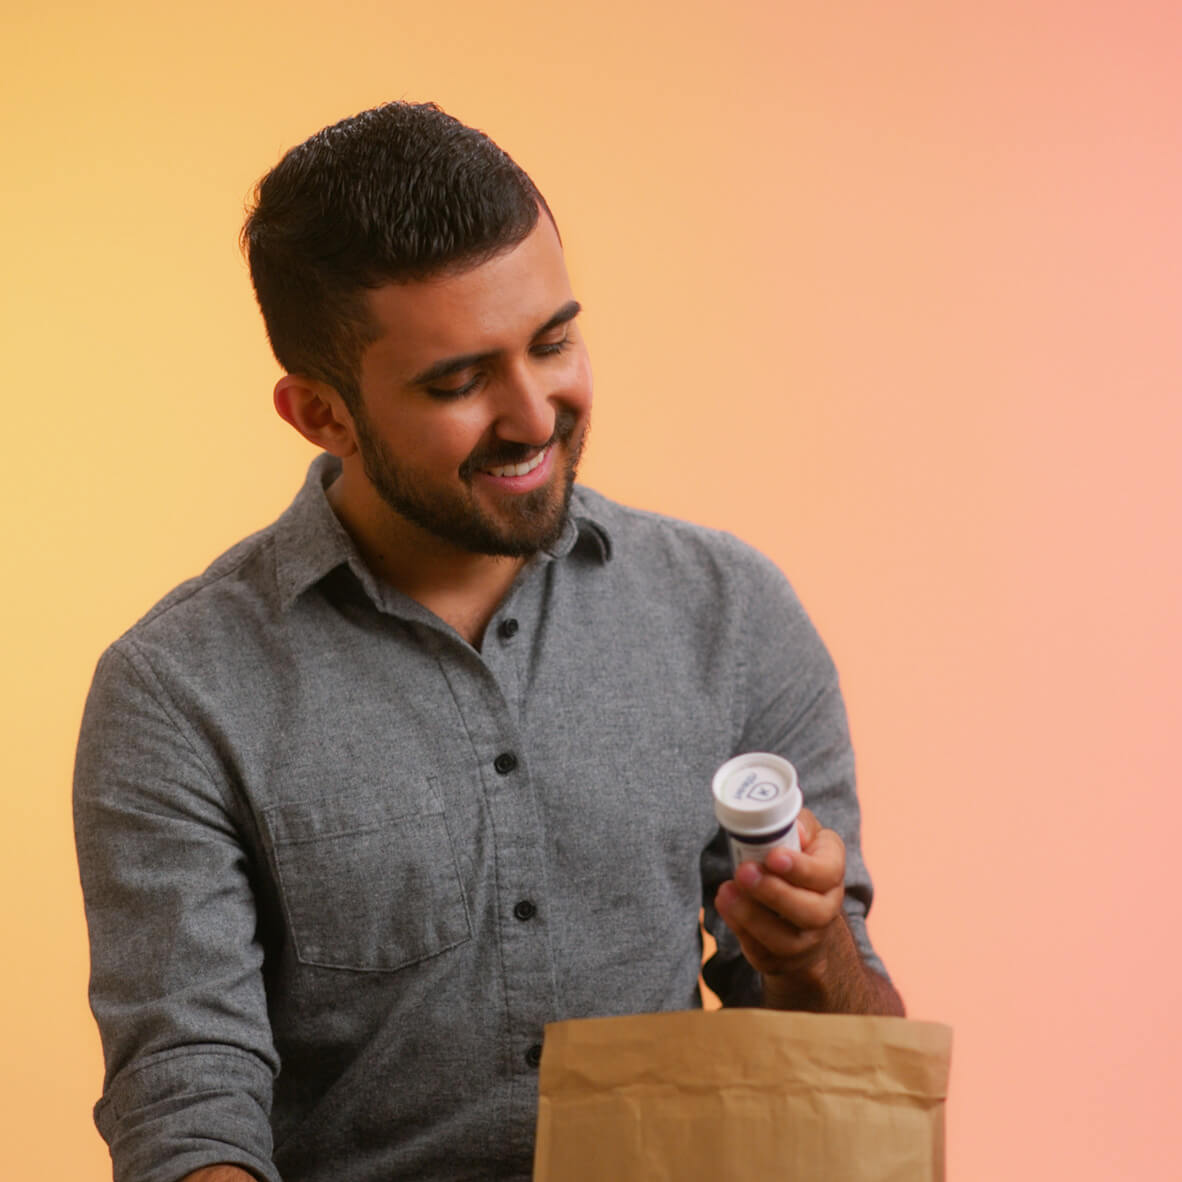 Man opening a package containing a bottle of medication